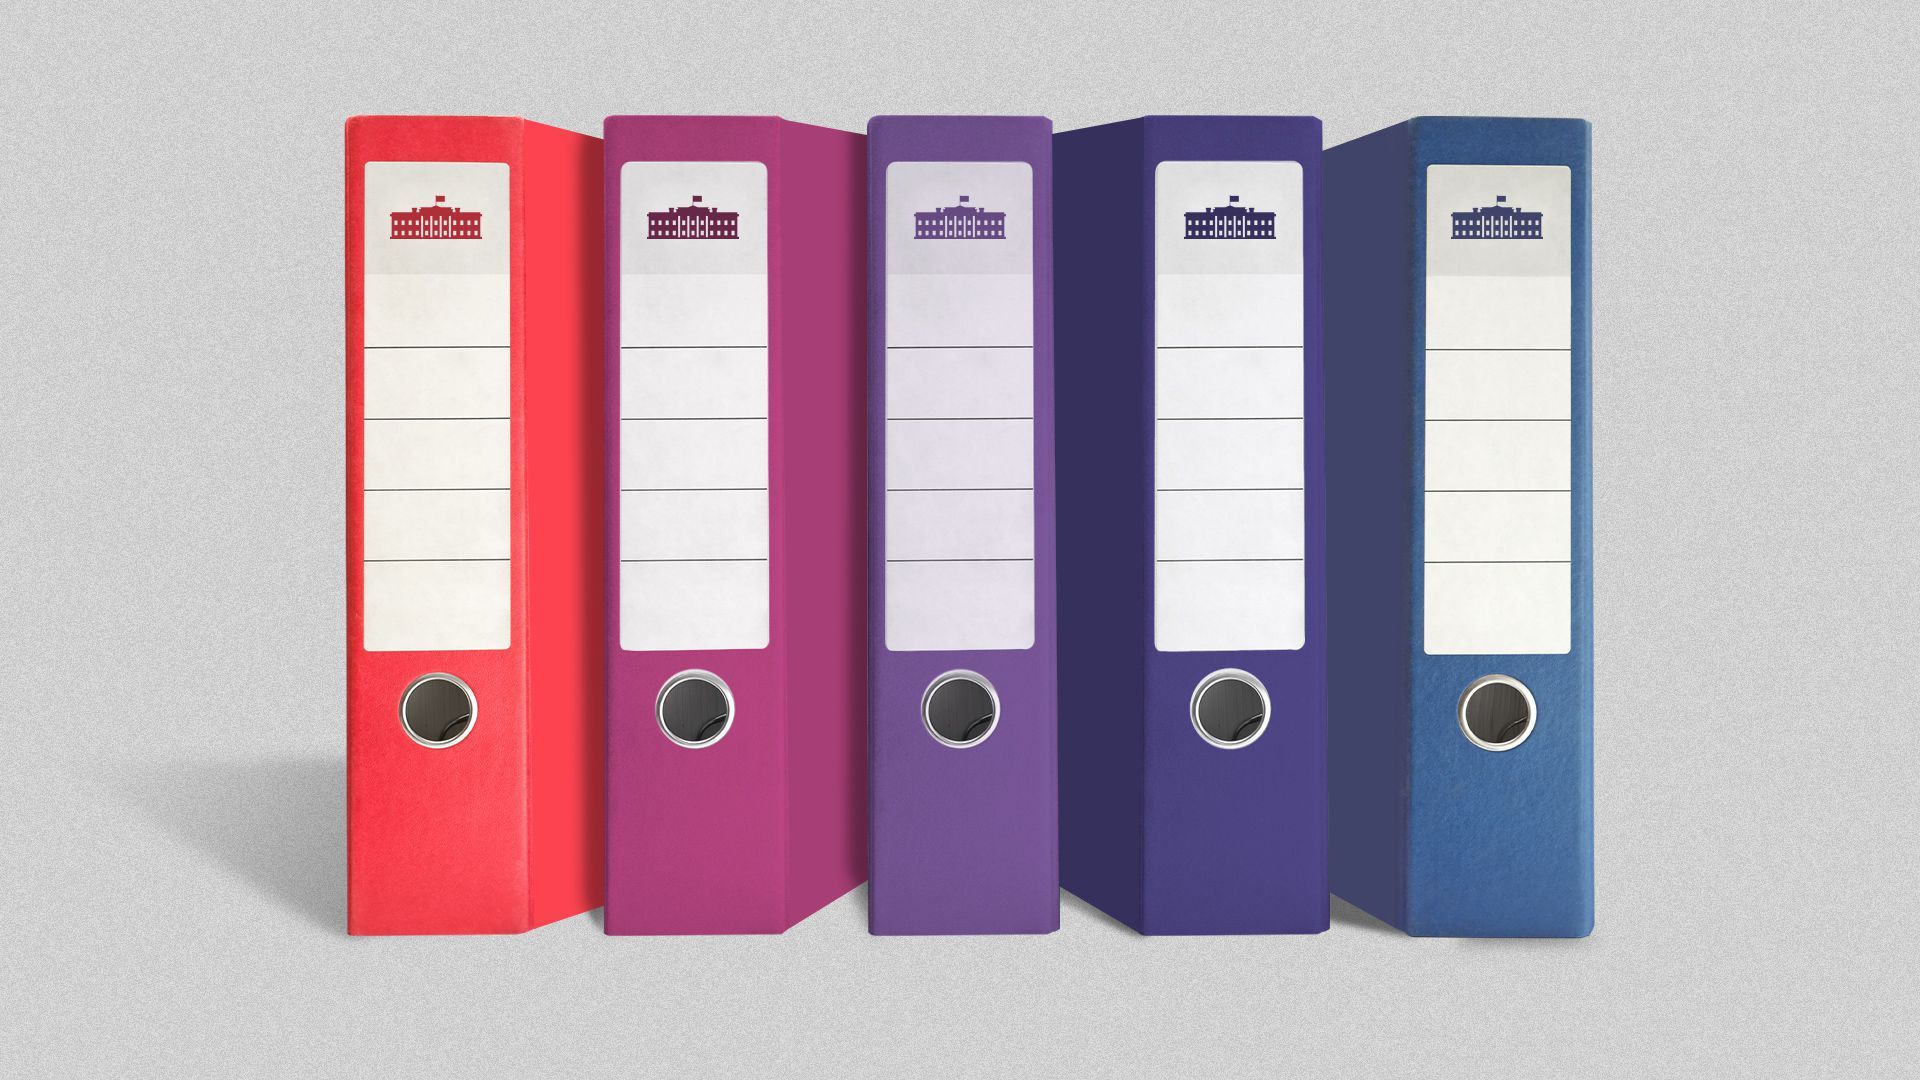 Illustration of a line of binders shifting in color from red to blue. 